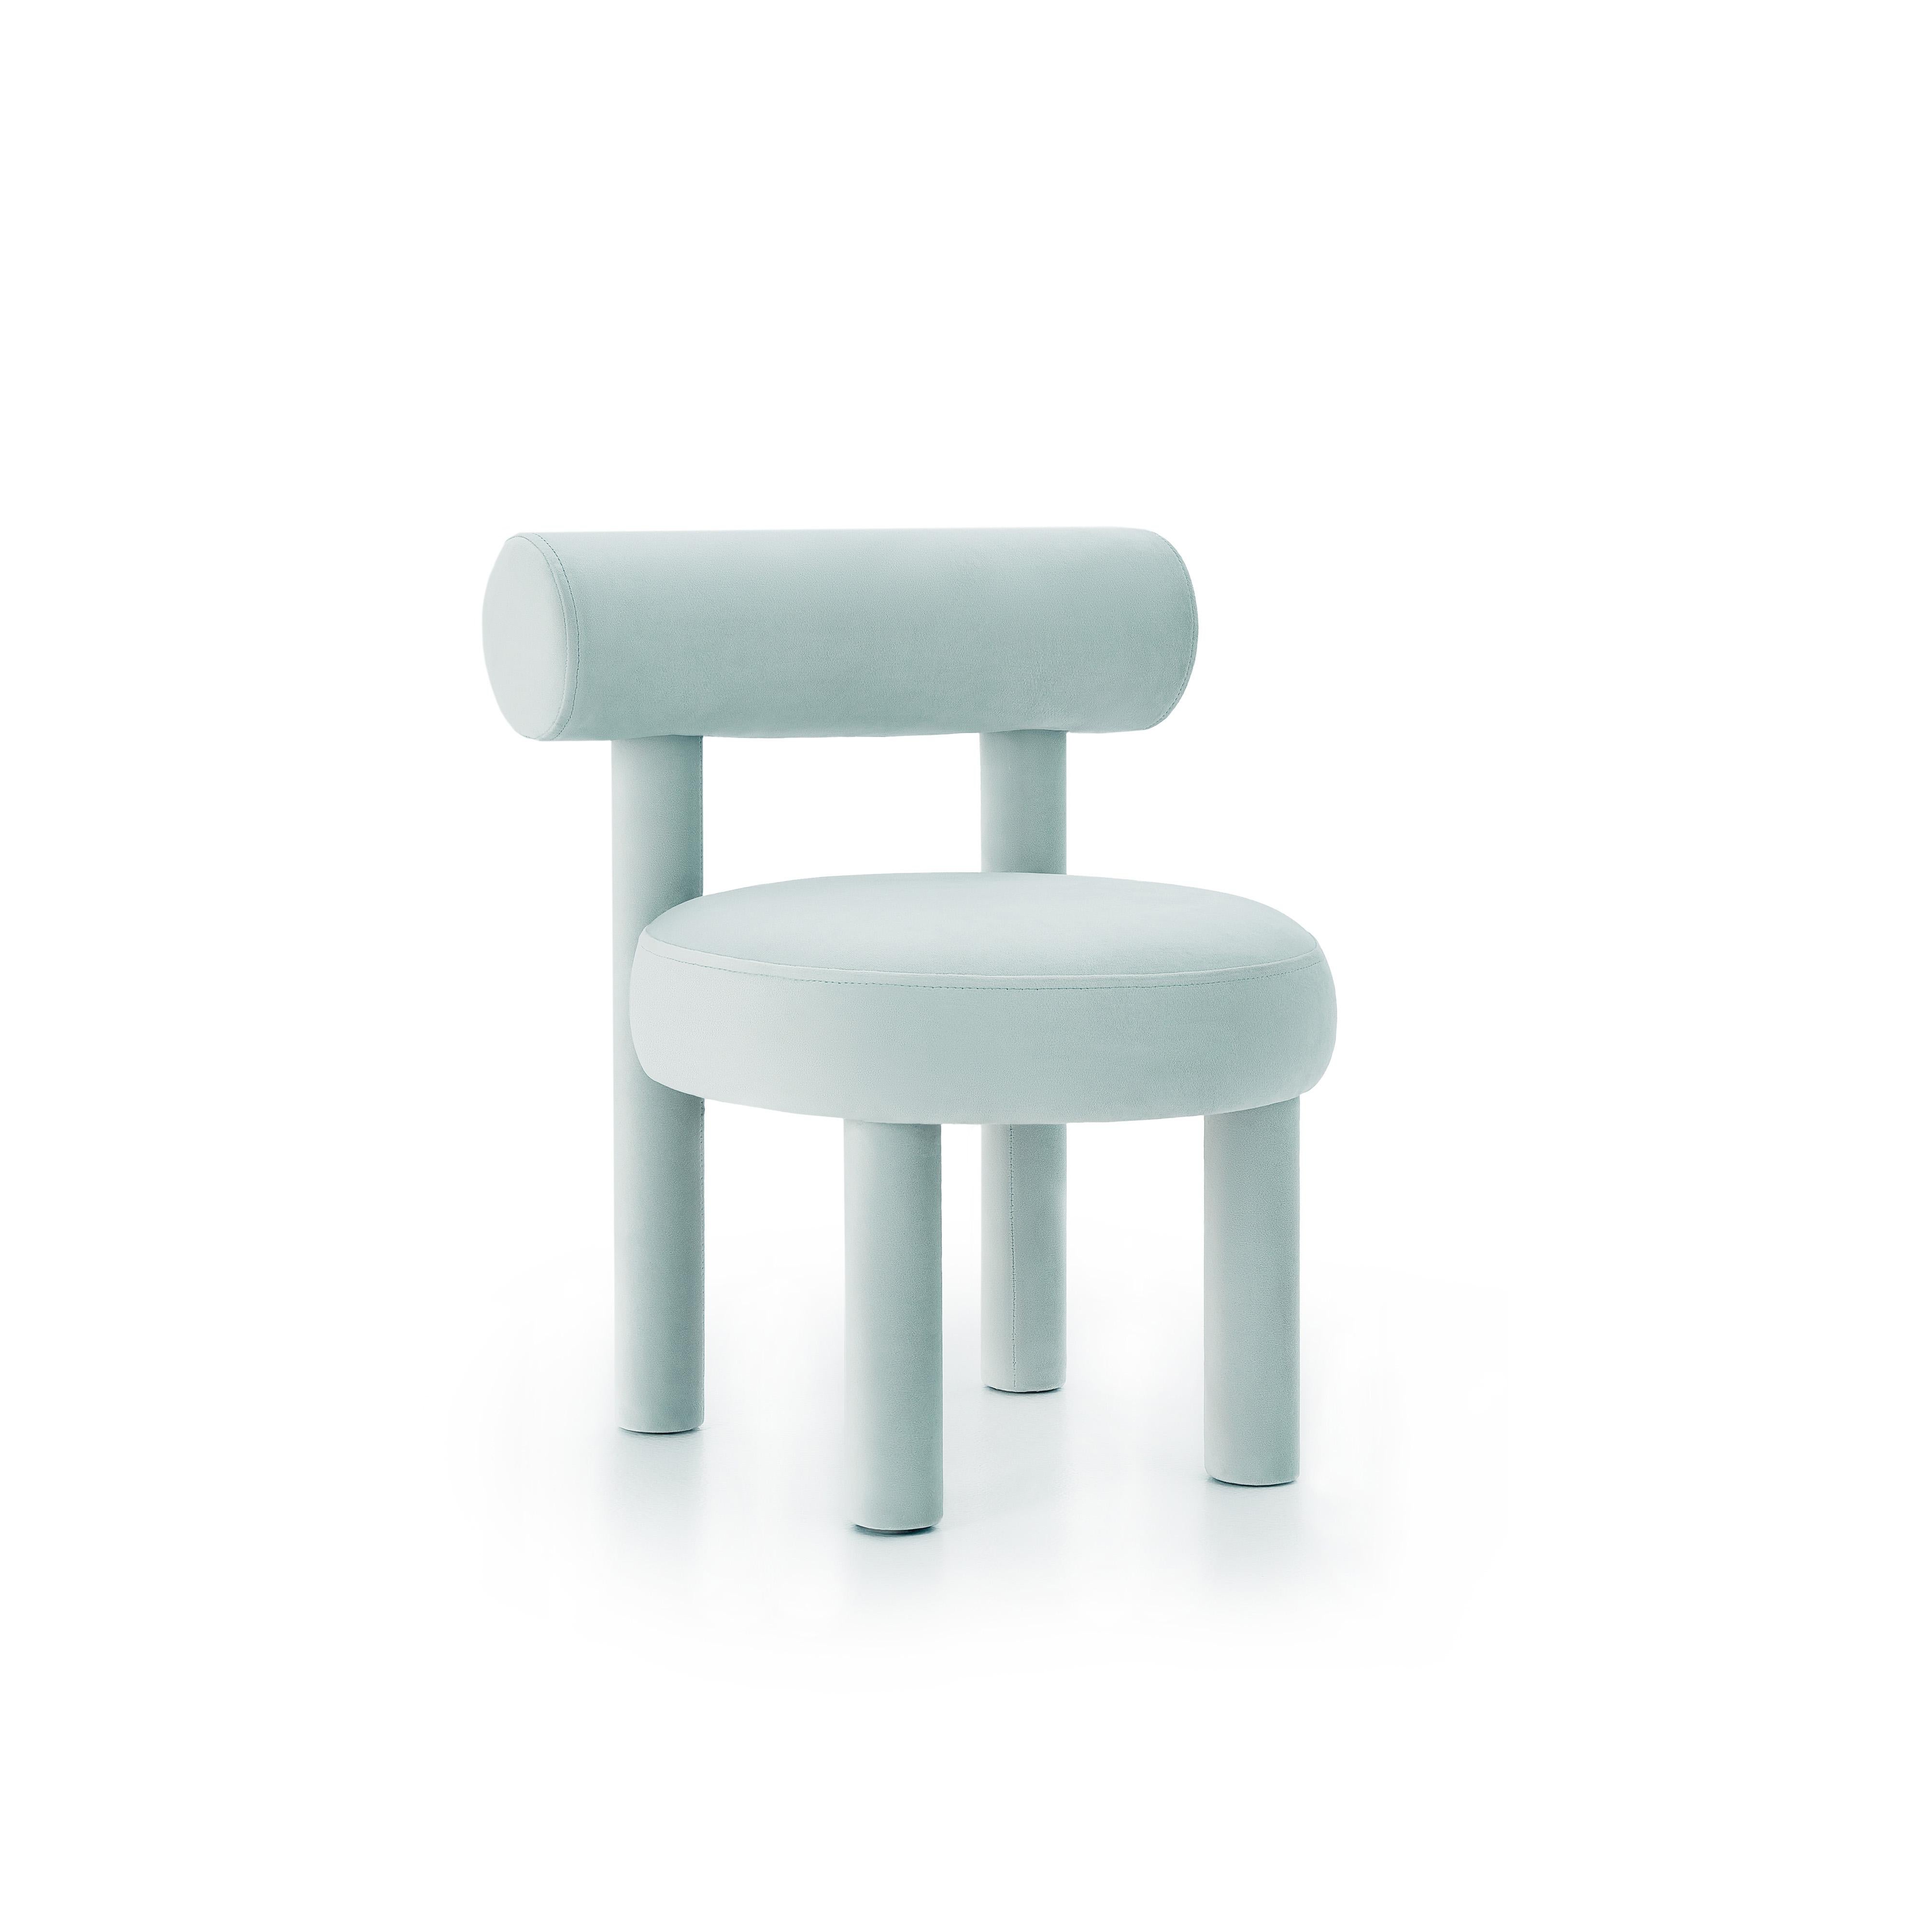 Baby Chair 'Gropius CS1' by Noom
Model in picture: Magic Velvet 2227
Designer: Kateryna Sokolova

Dimensions: 
H 50 cm, W 40 cm, D 40 cm  seat height 30 cm

The Baby Gropius chair is designed in the same spirit as the collection's flagman Gropius